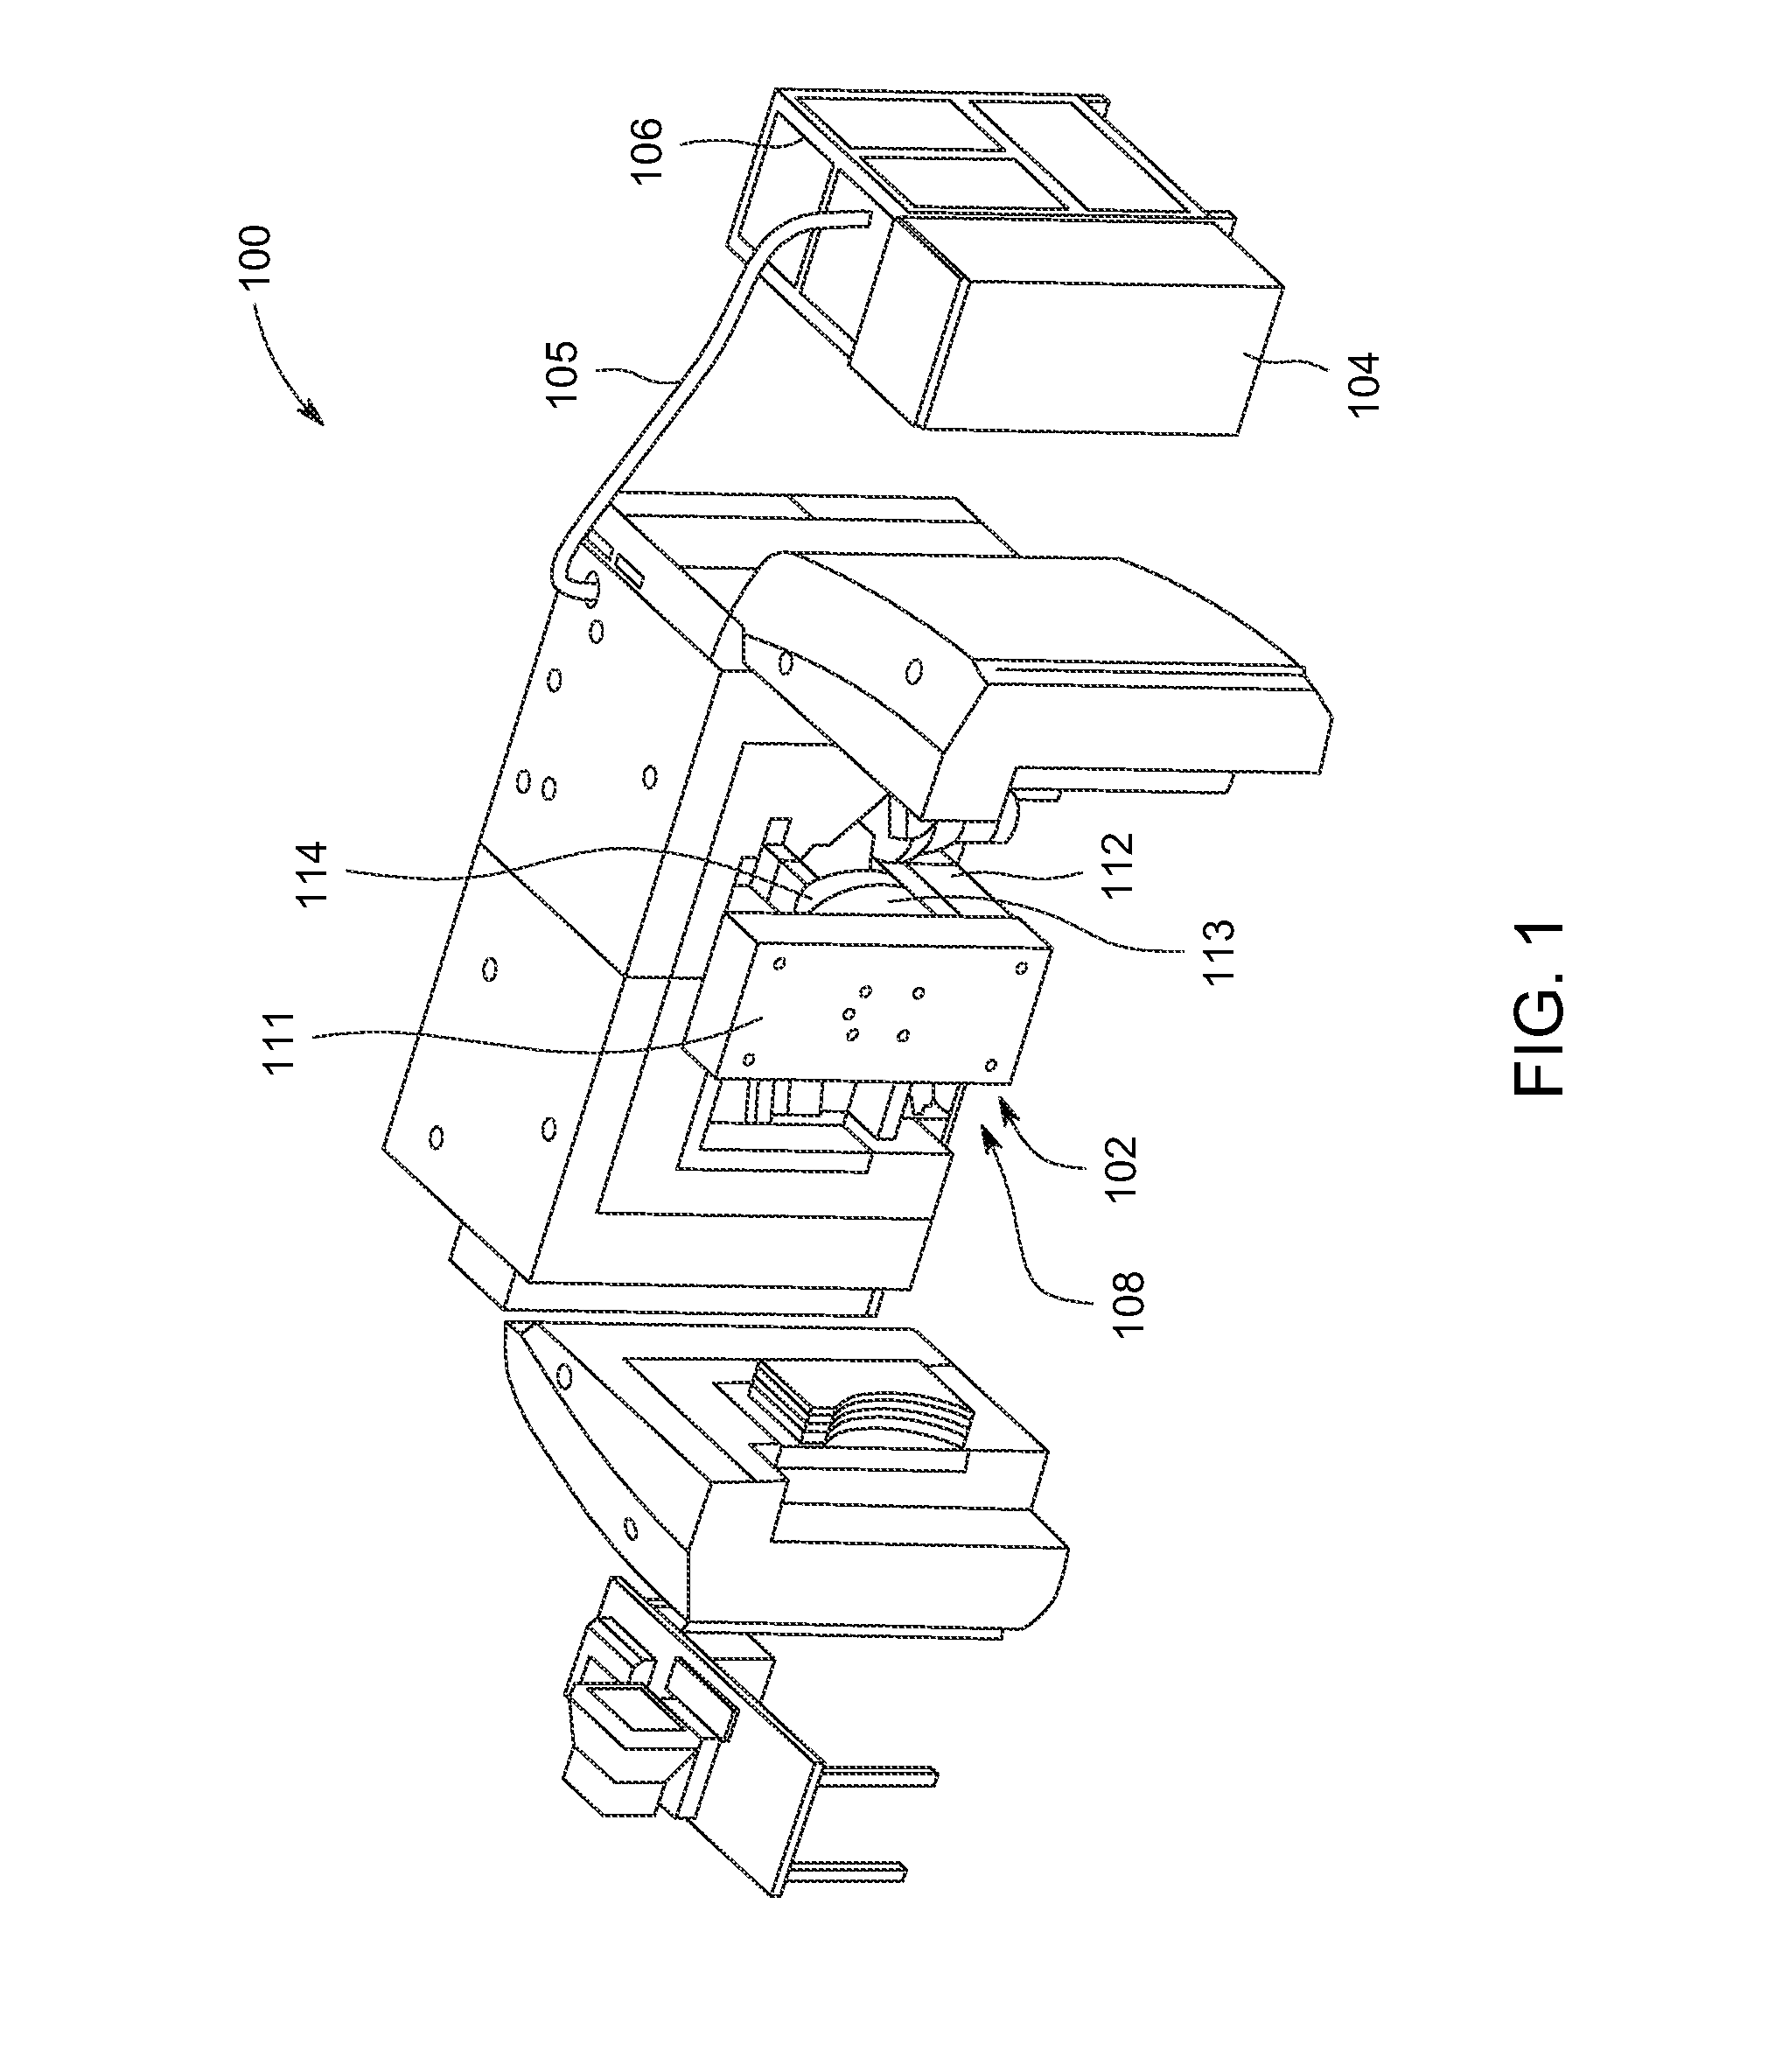 Radio-frequency power generator configured to reduce electromagnetic emissions